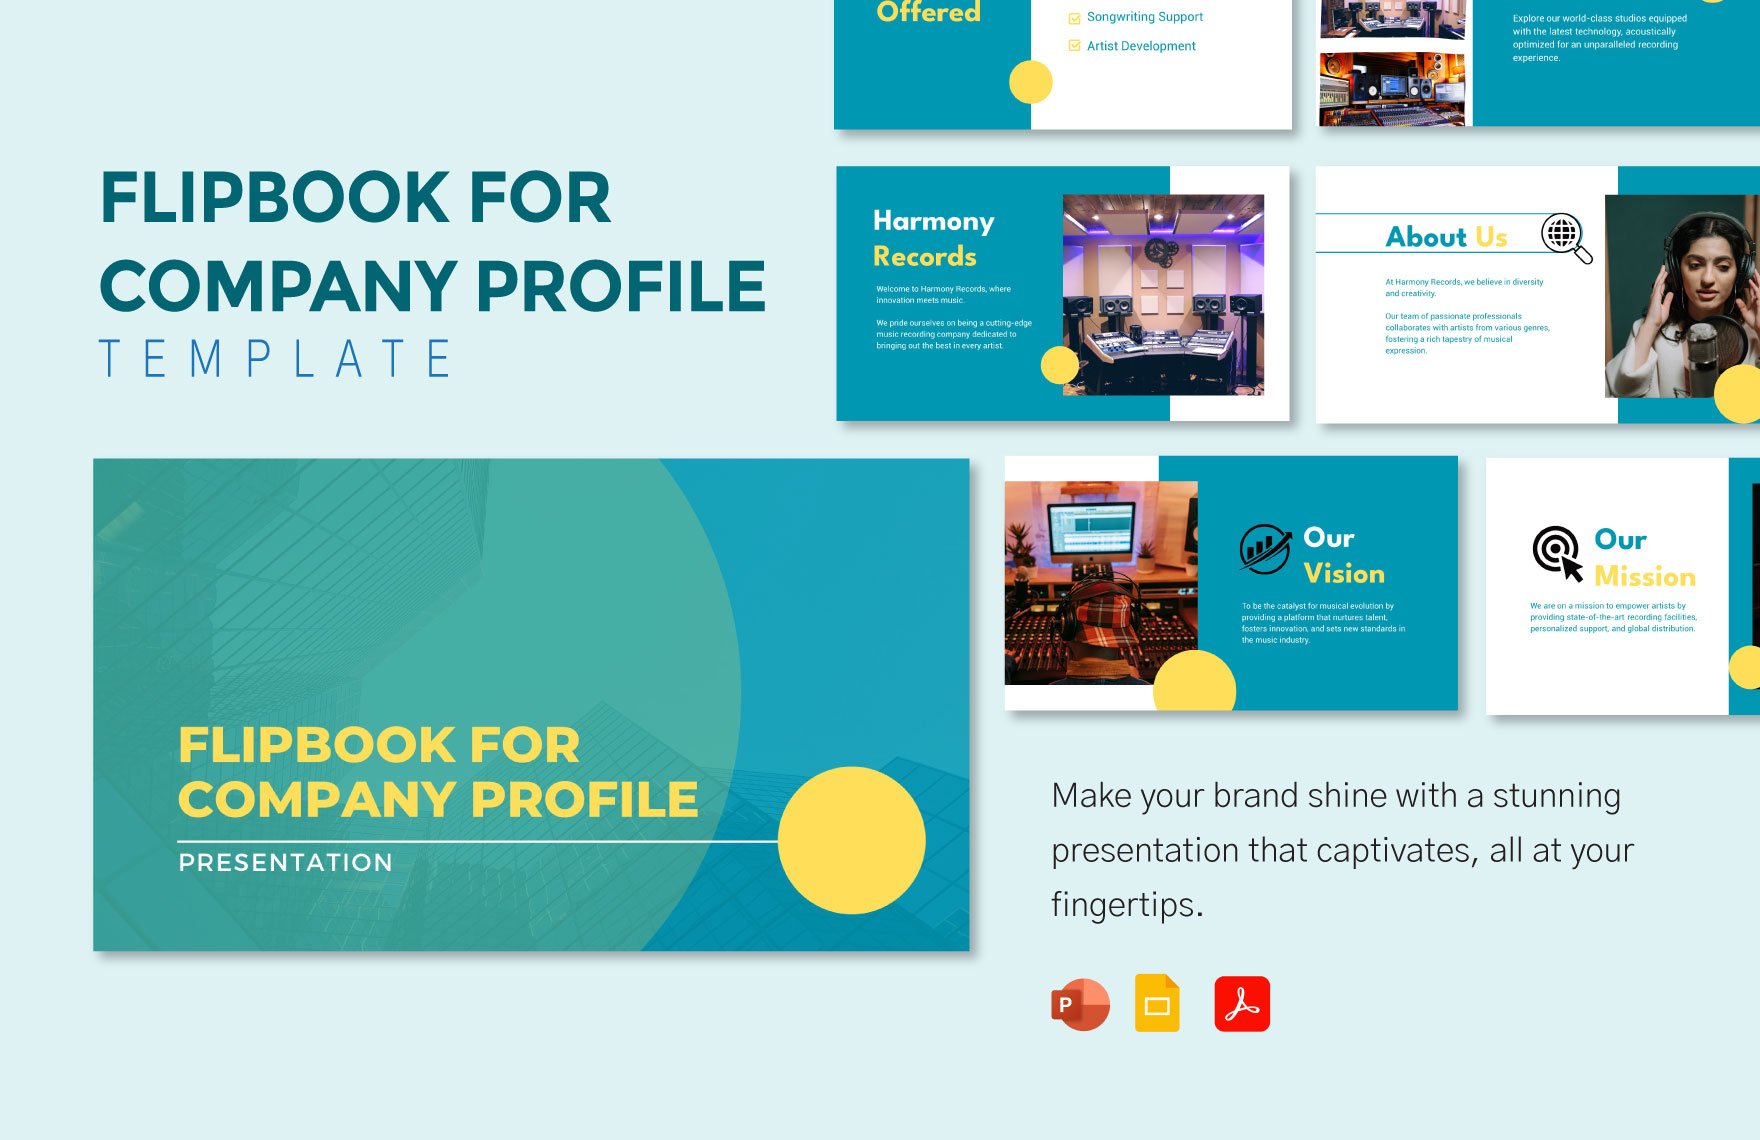 Flipbook Template for Company Profile